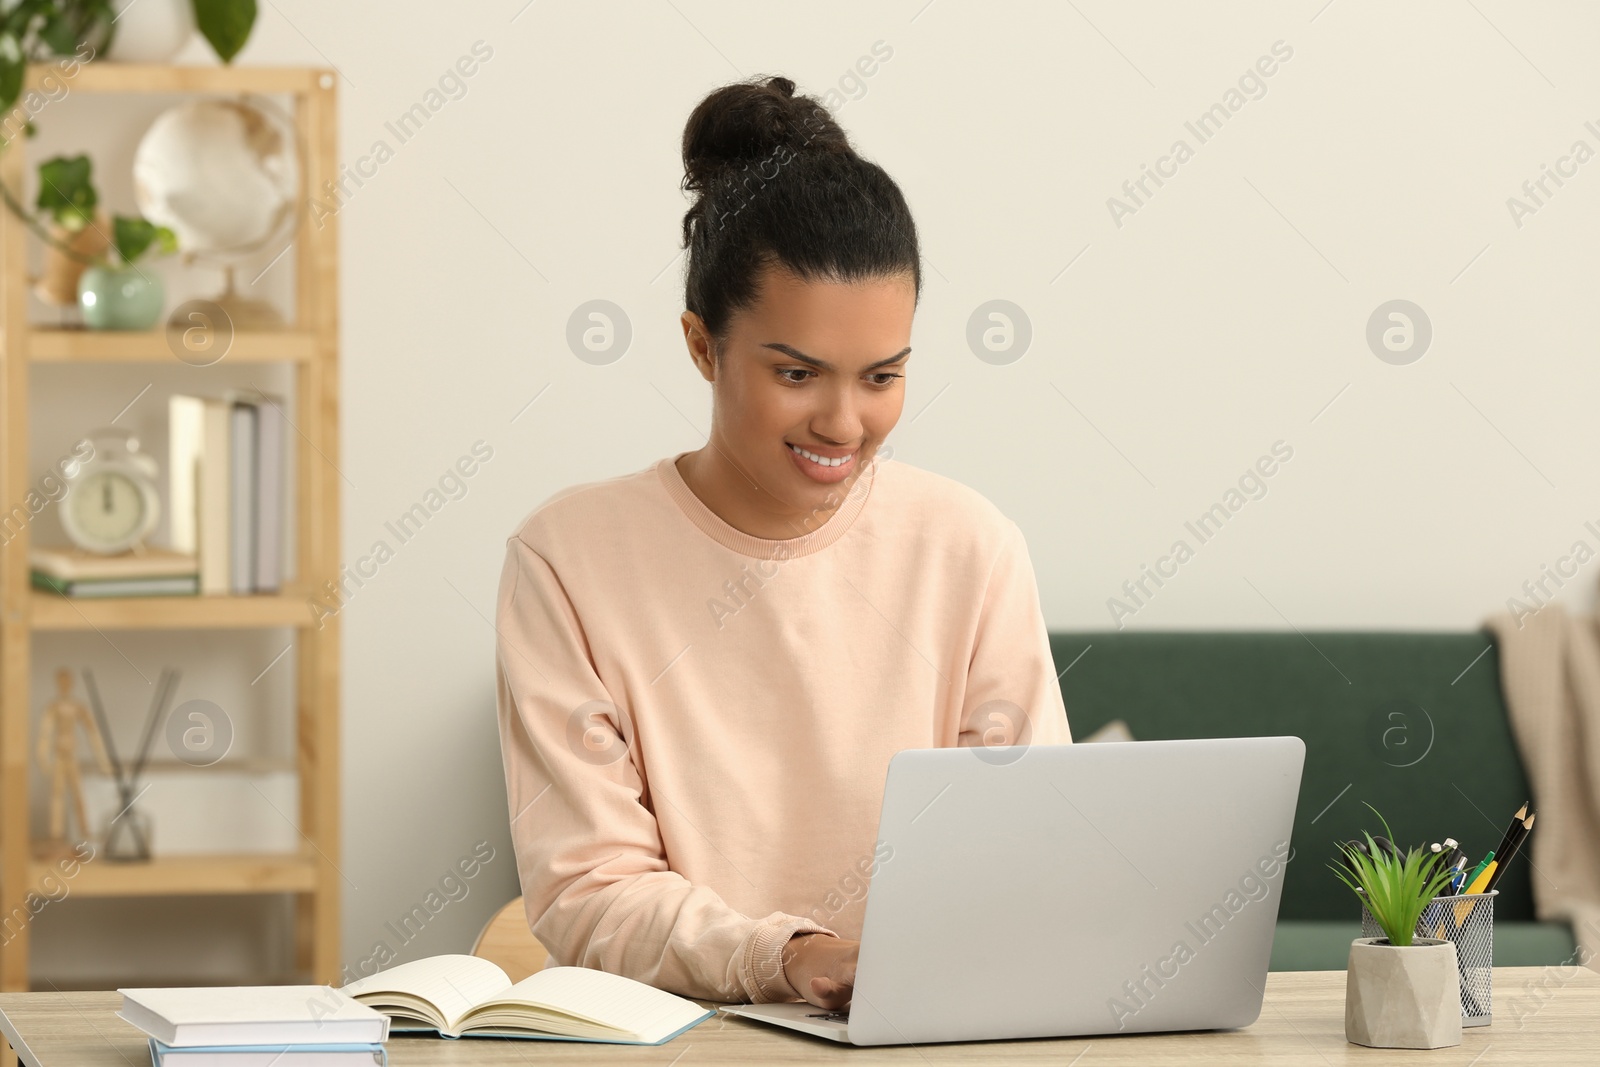 Photo of Beautiful African American woman working with laptop at table in room